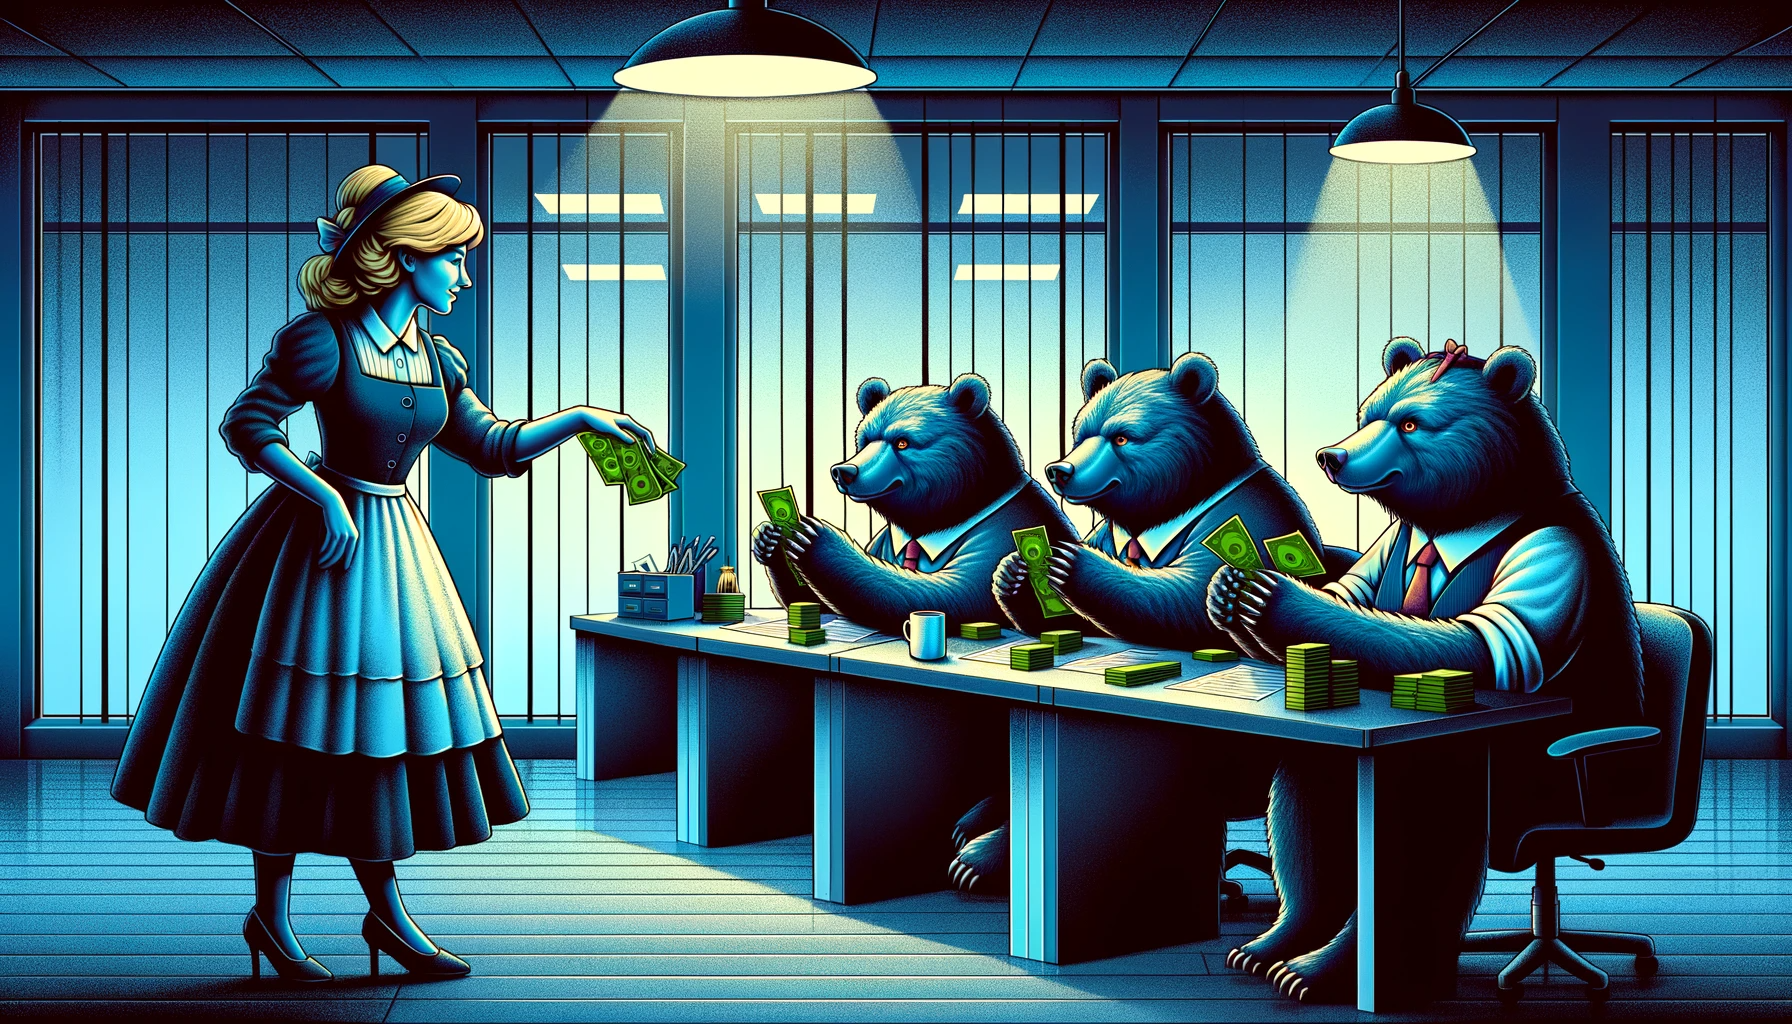 Goldilocks & The 3 Bears: A Guide to Setting Quotas